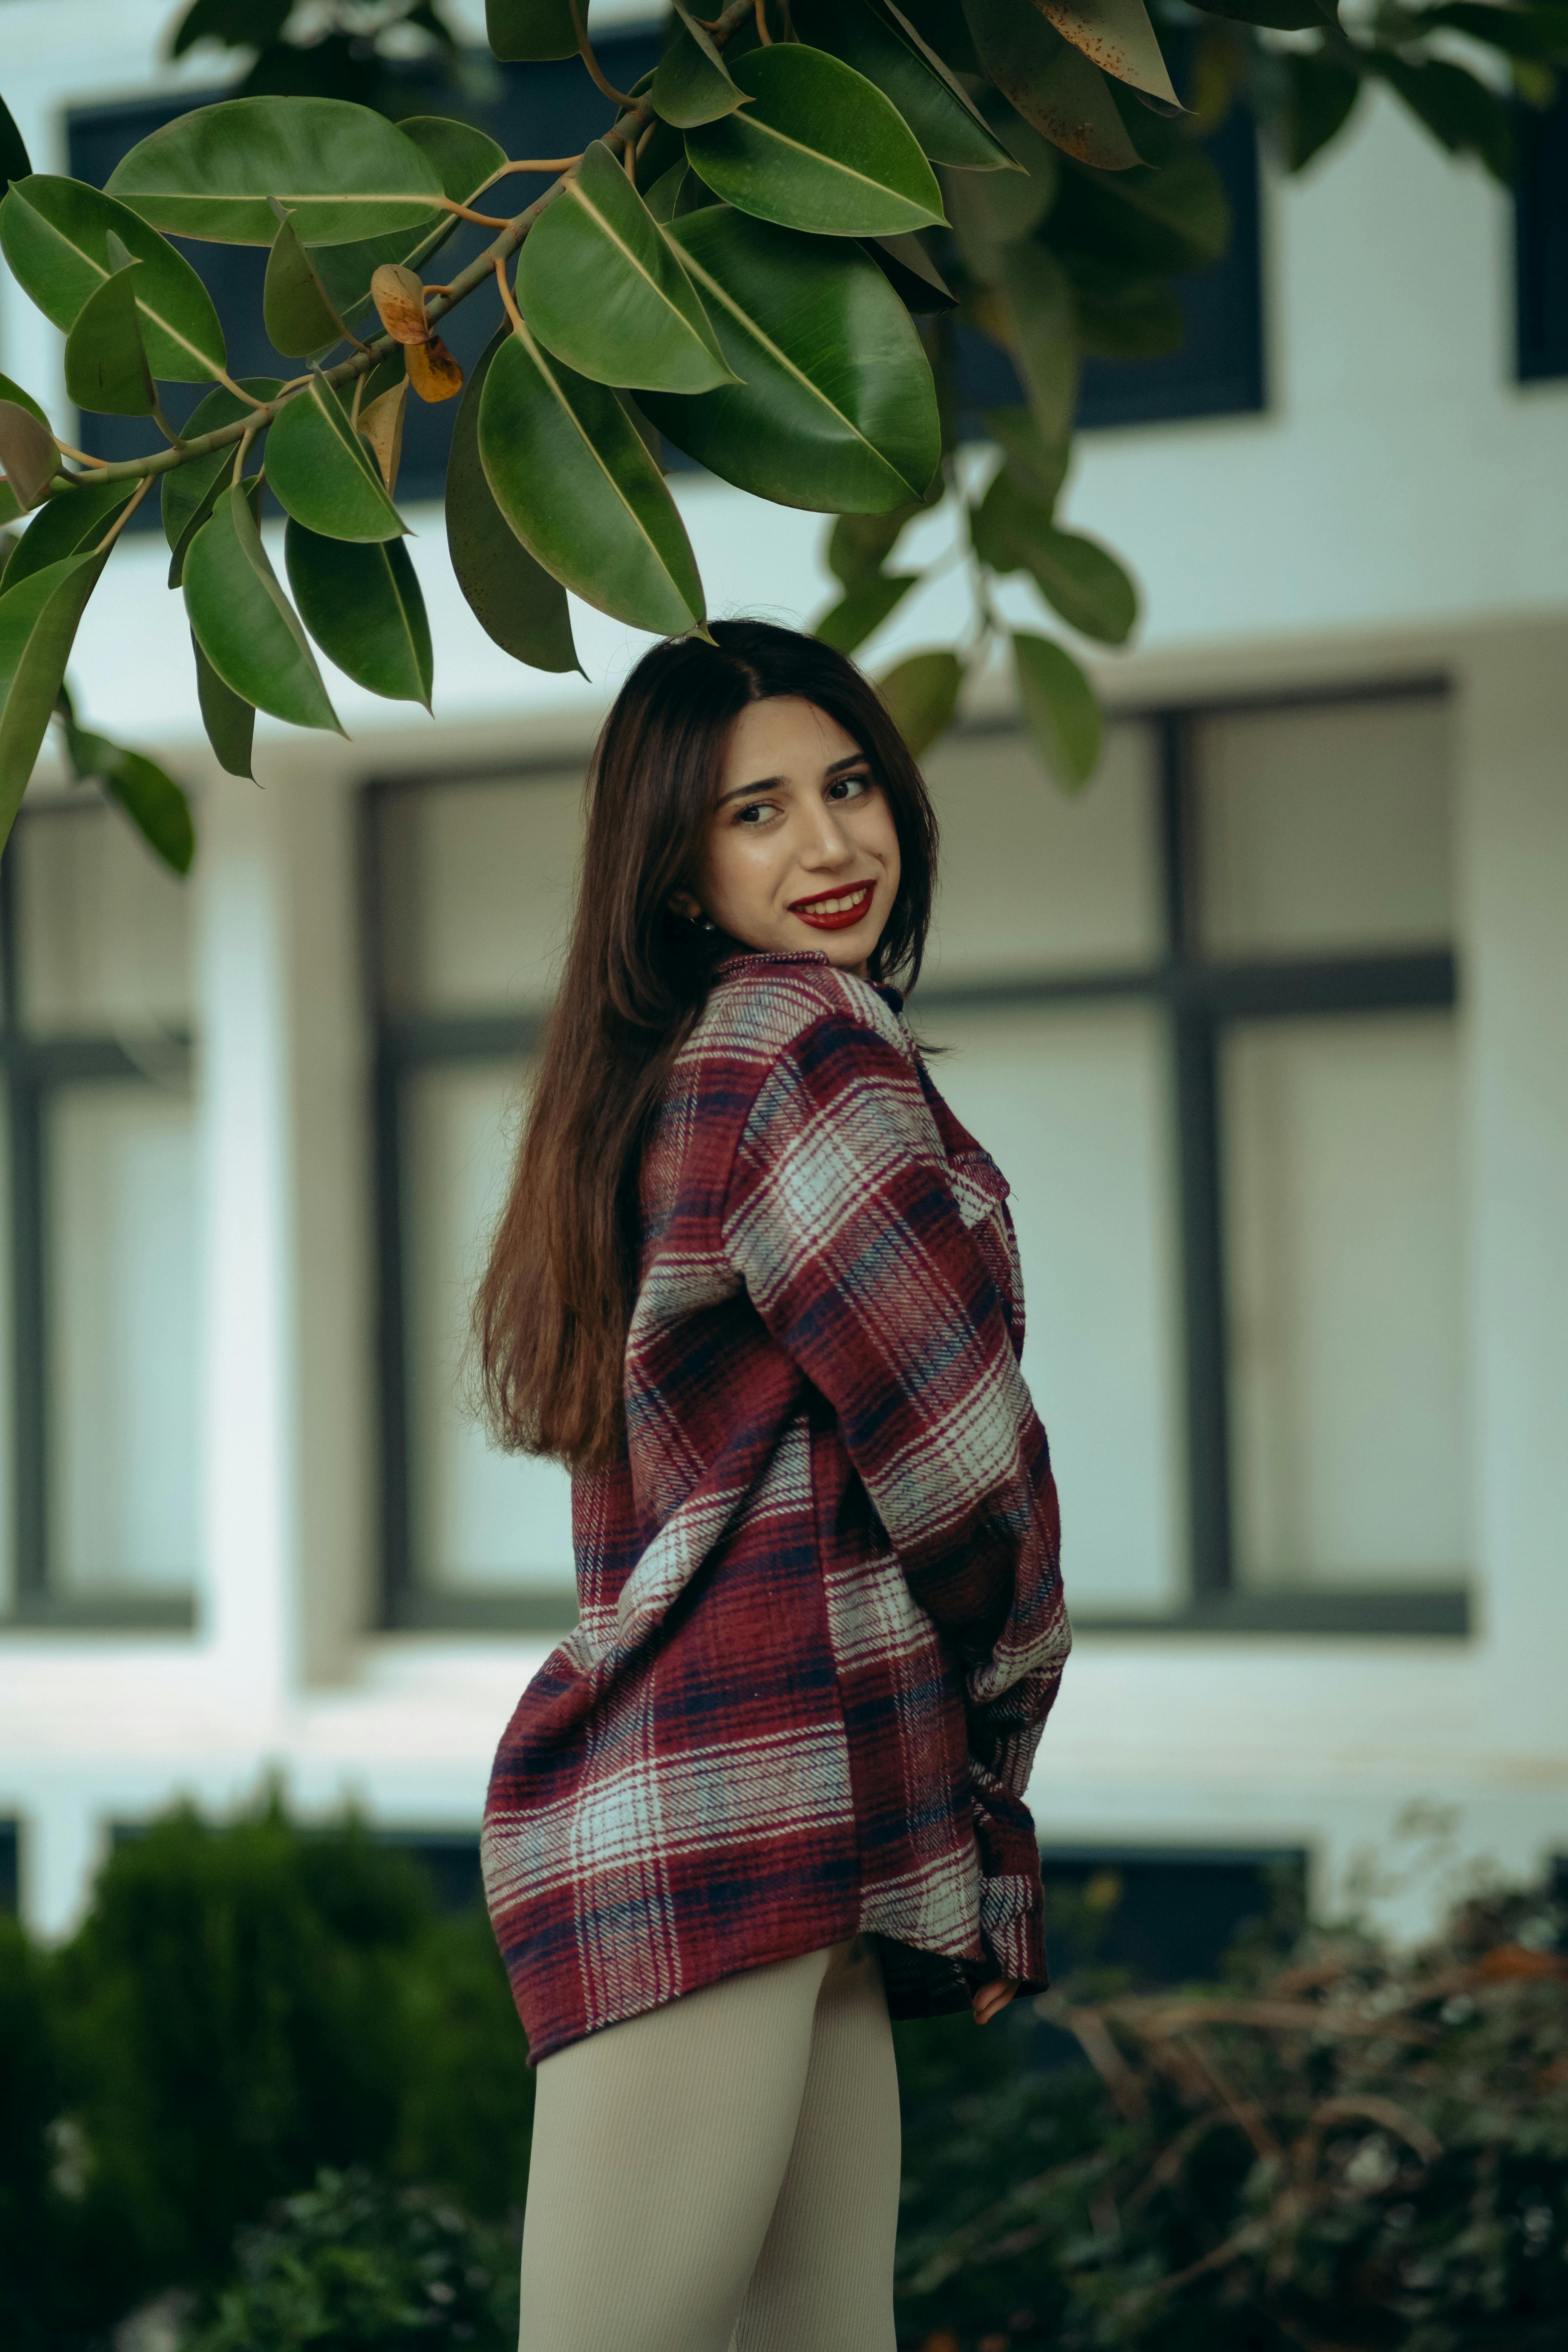 Young Woman in Flannel Blouse and Leggings Under a Tree Branch